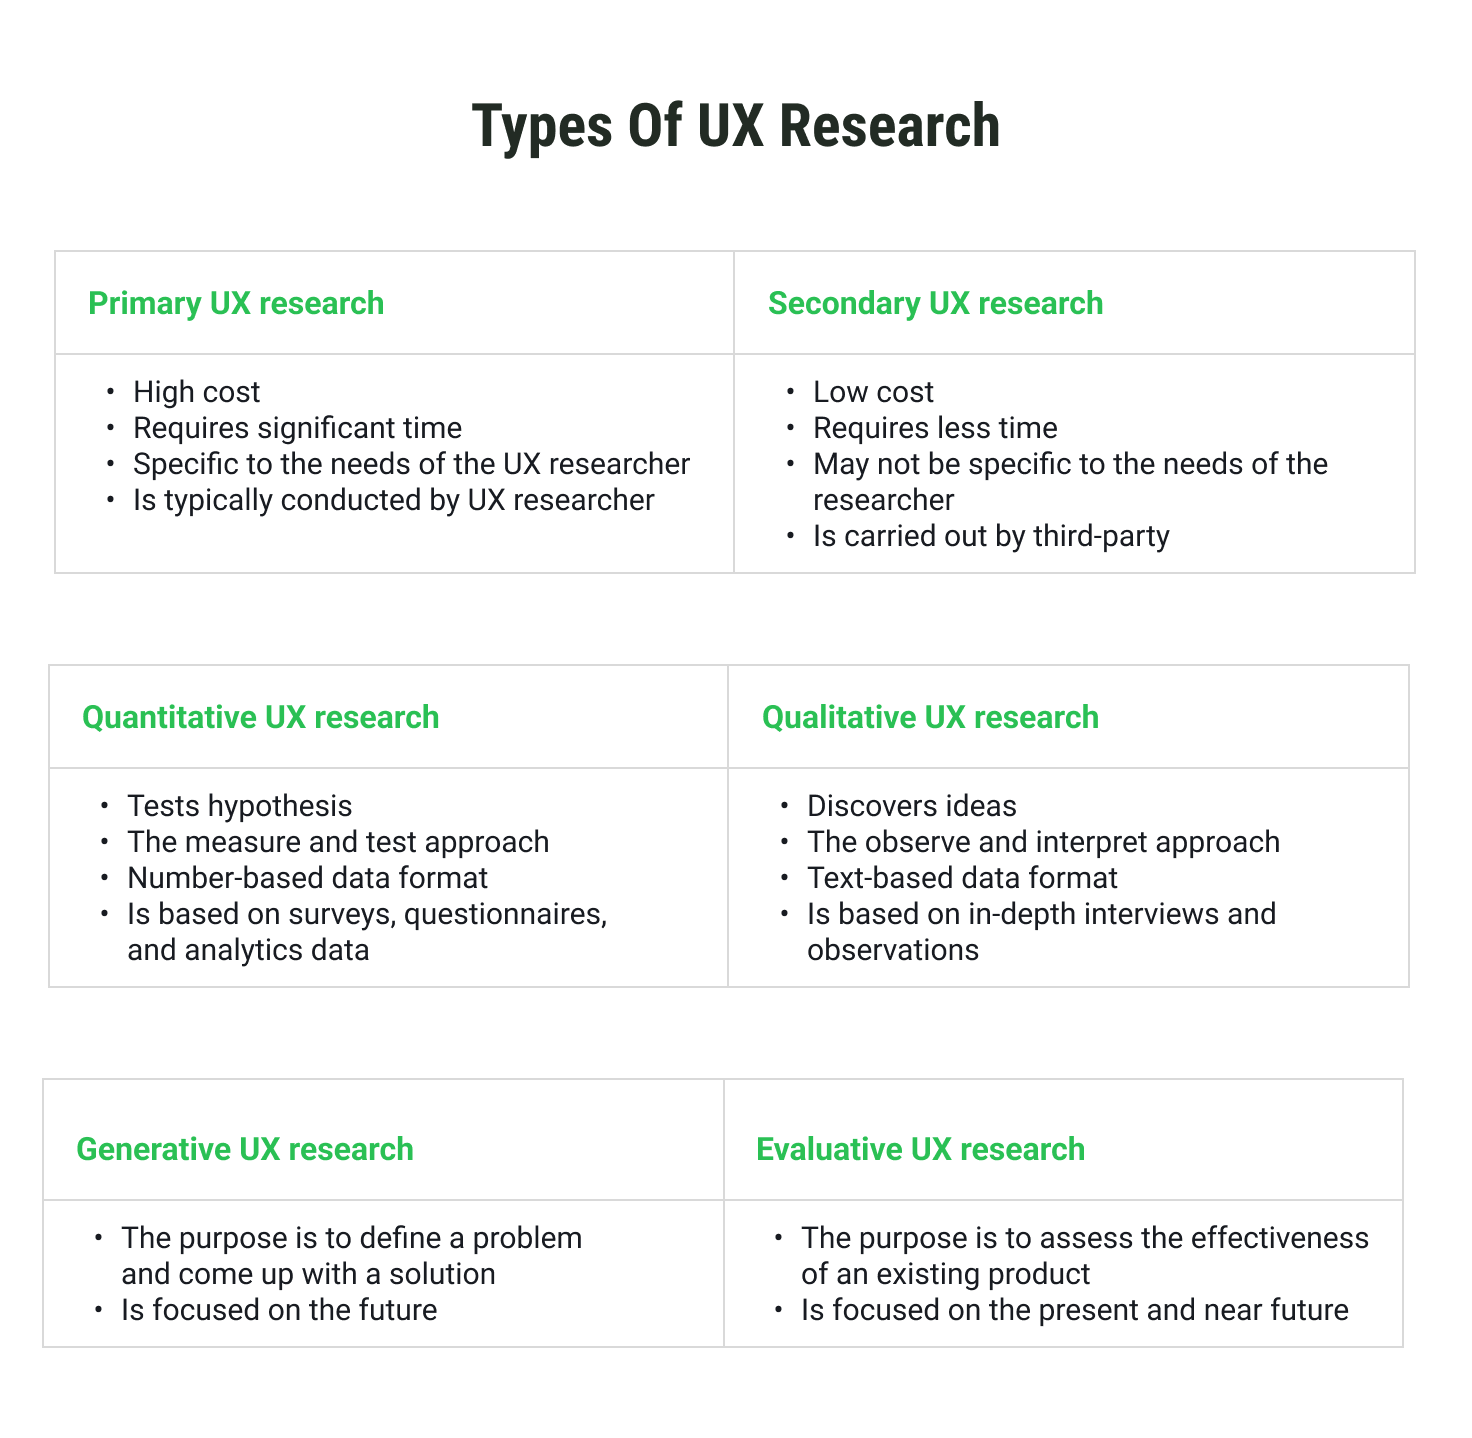 Types of UX research